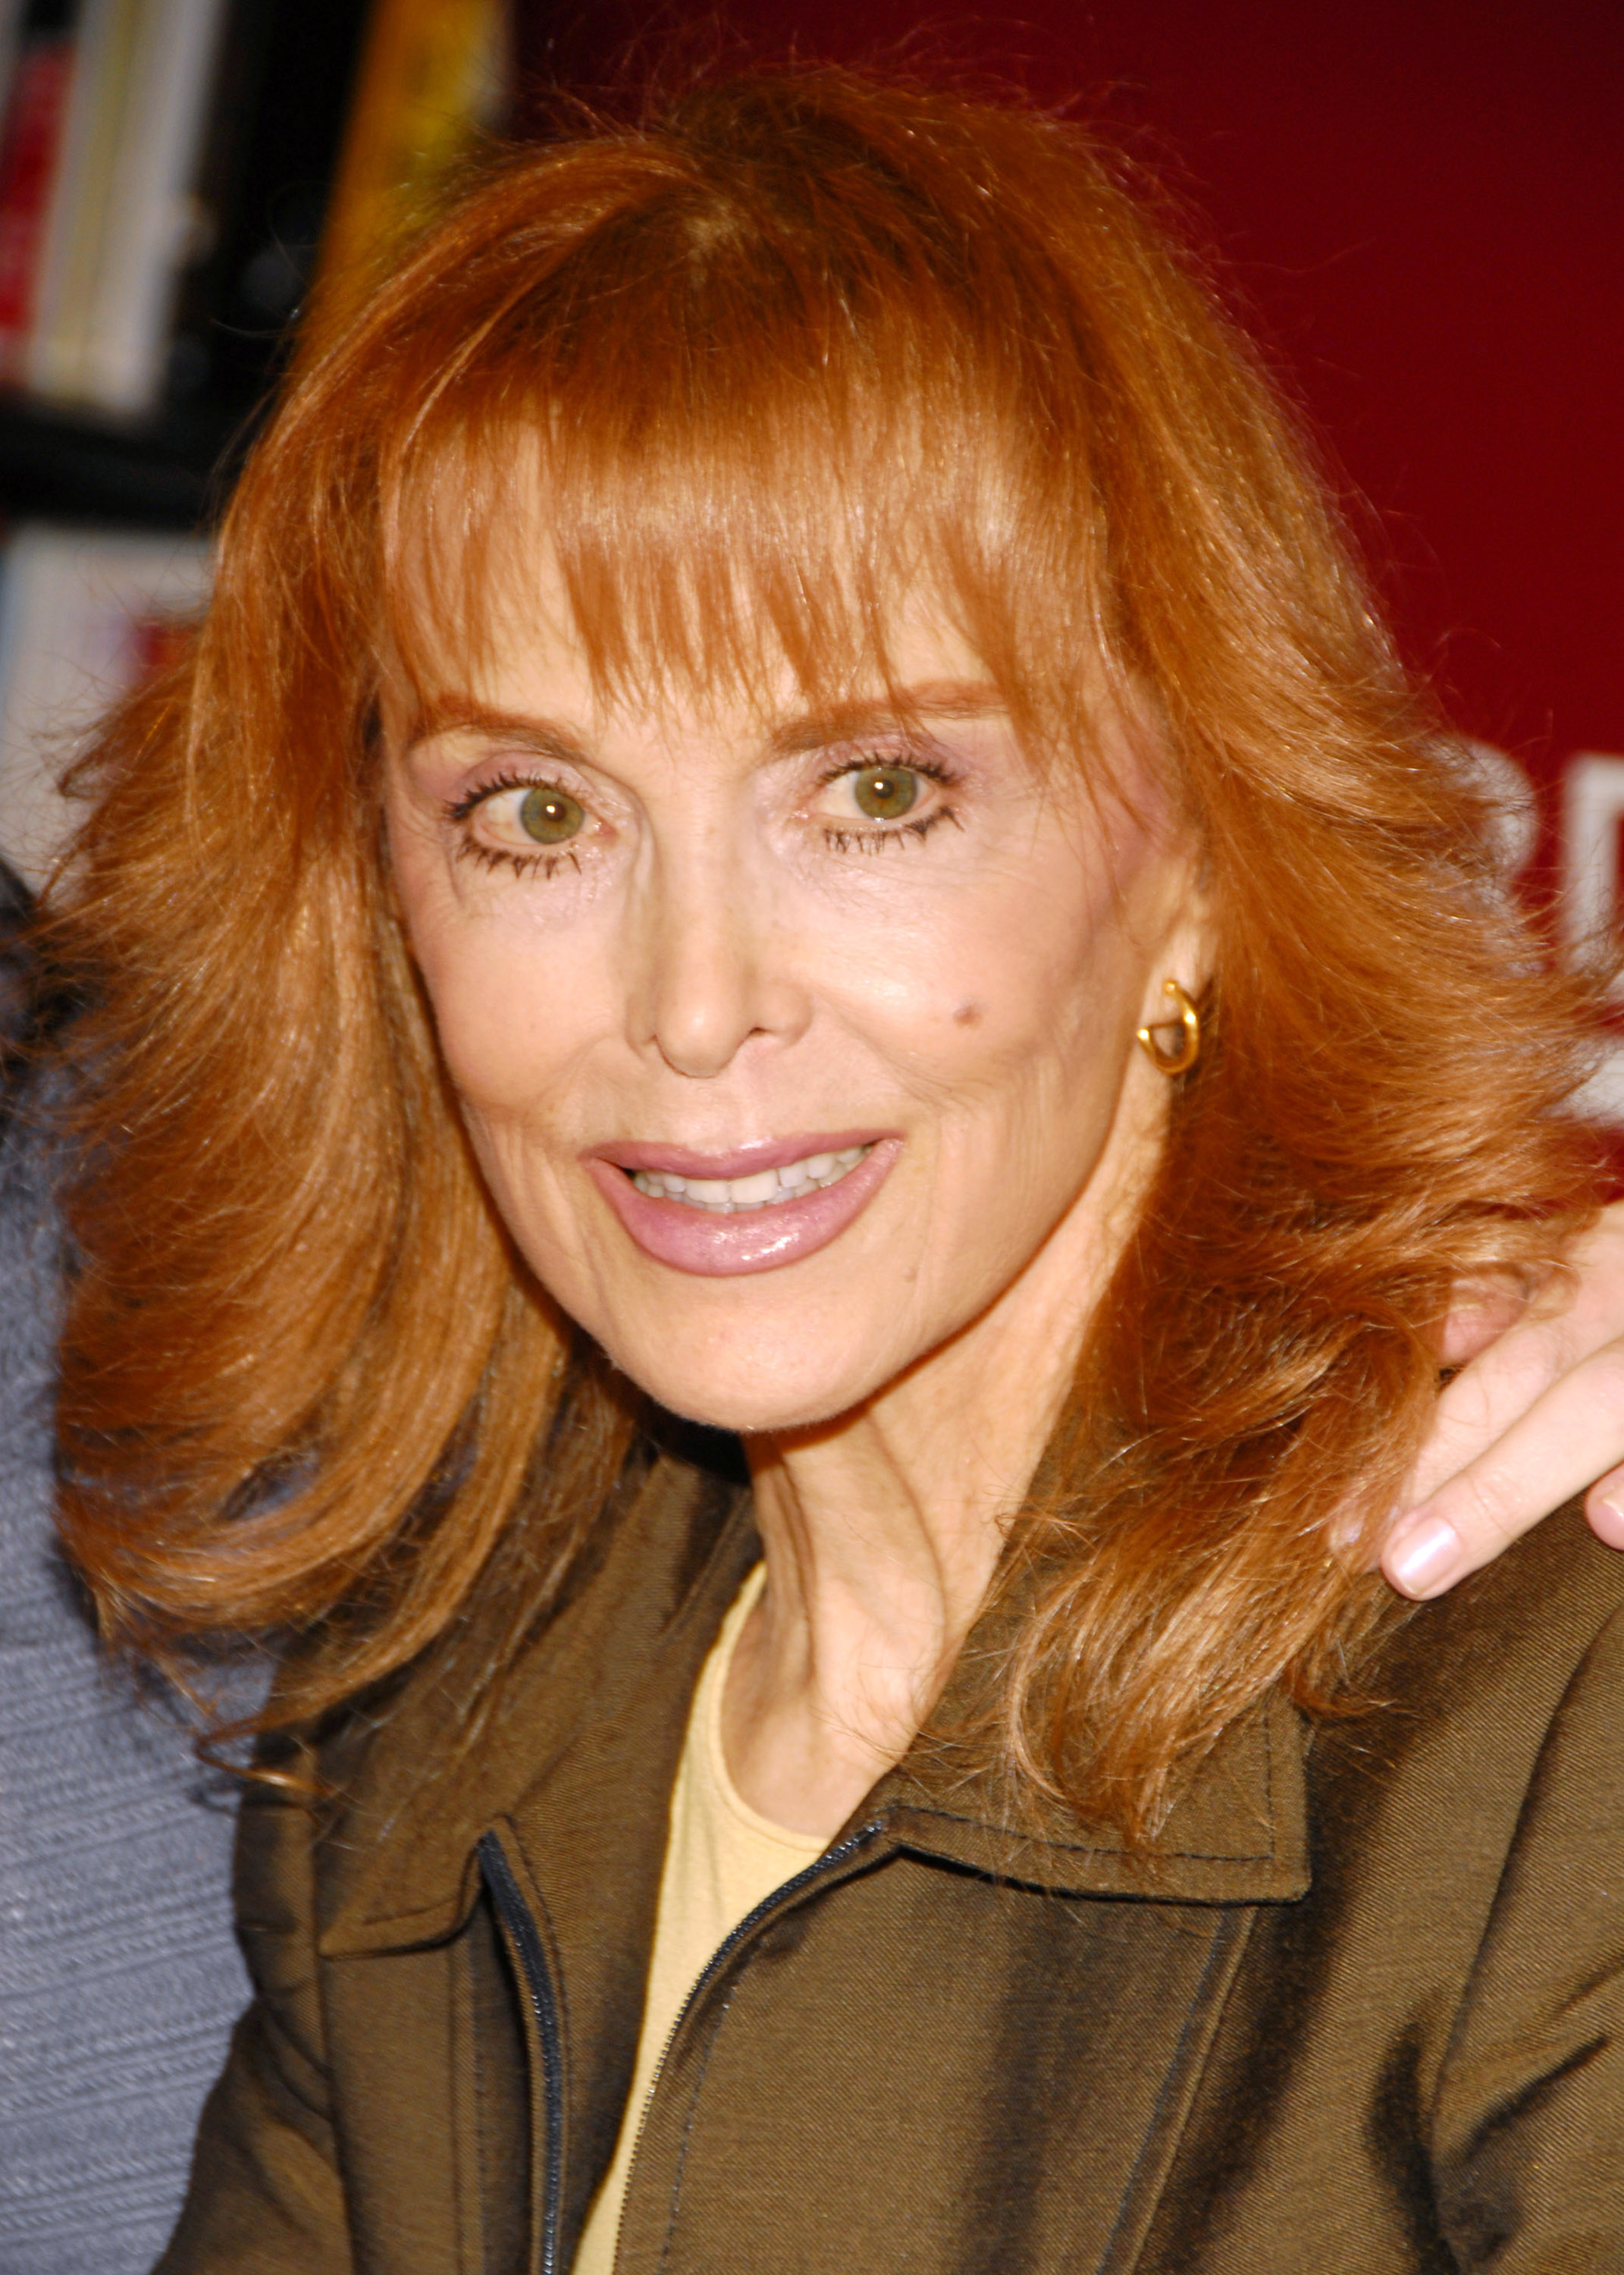 Tina Louise during the signing of Her New Book "When I Grow Up" on March 15, 2007 at Borders in New York City, New York, United States | Source: Getty Images